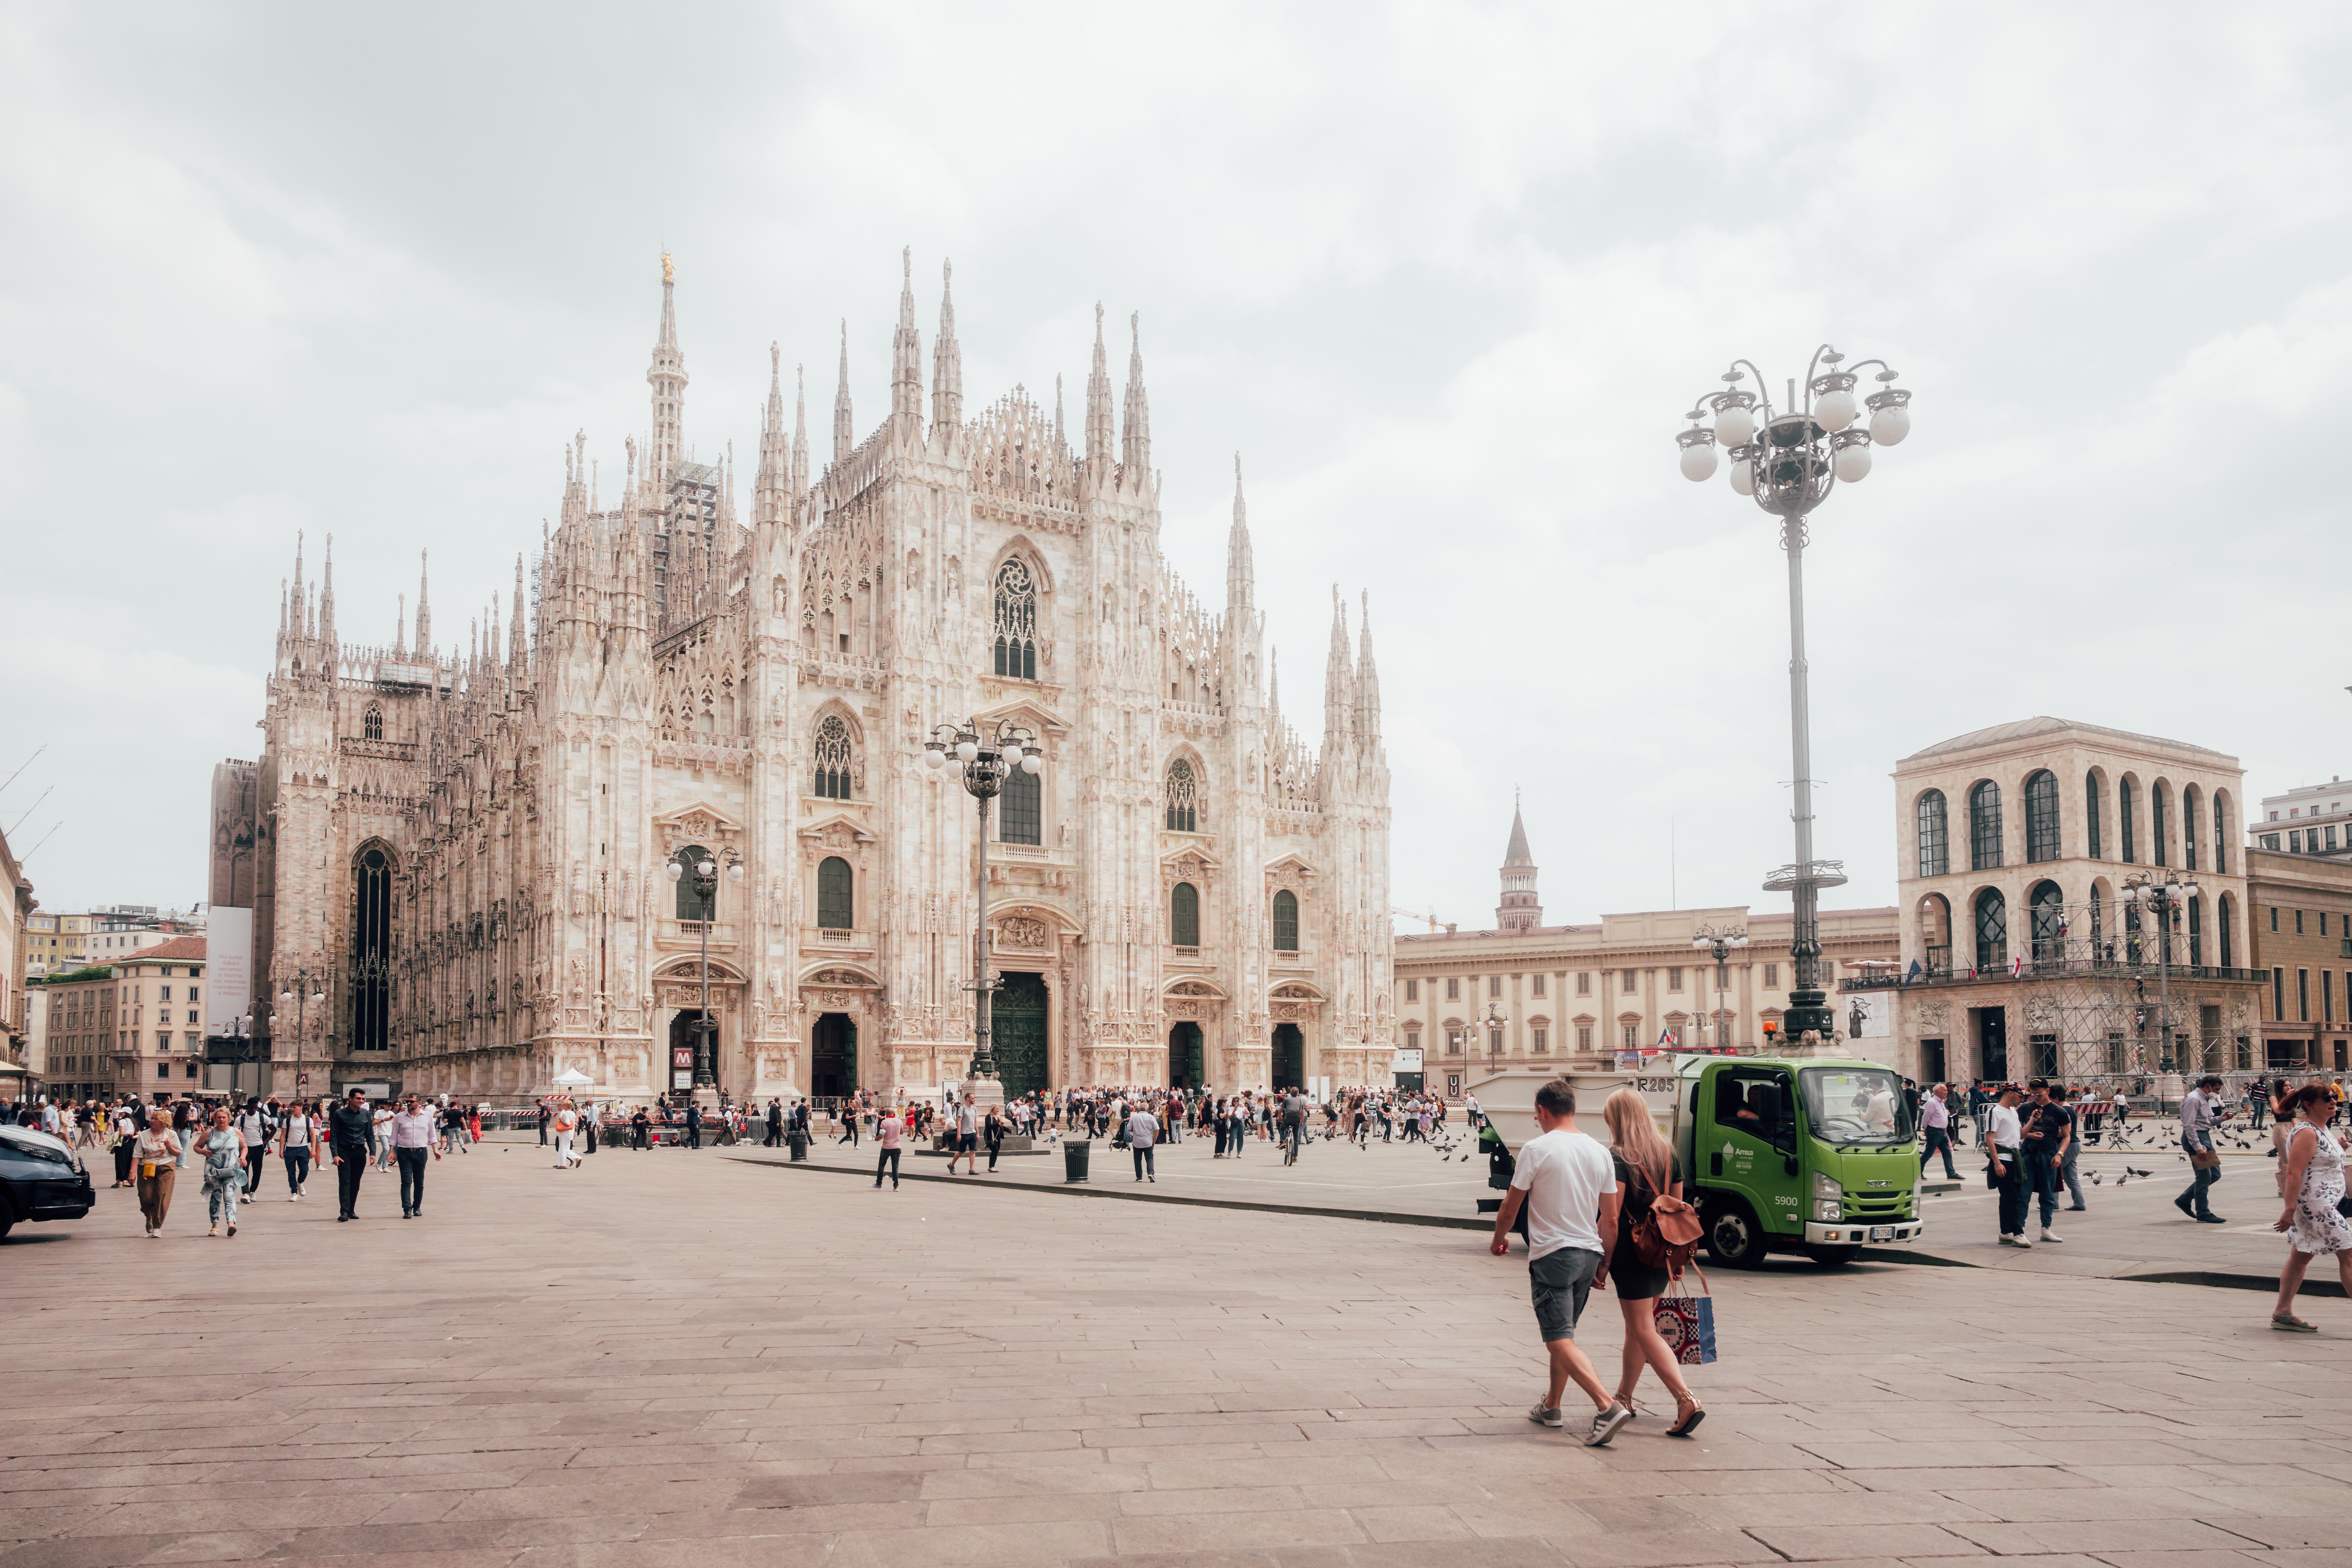 Cover Image for The Top 11 Things You Need to Know About Duomo di Milan Cathedral Before You Visit